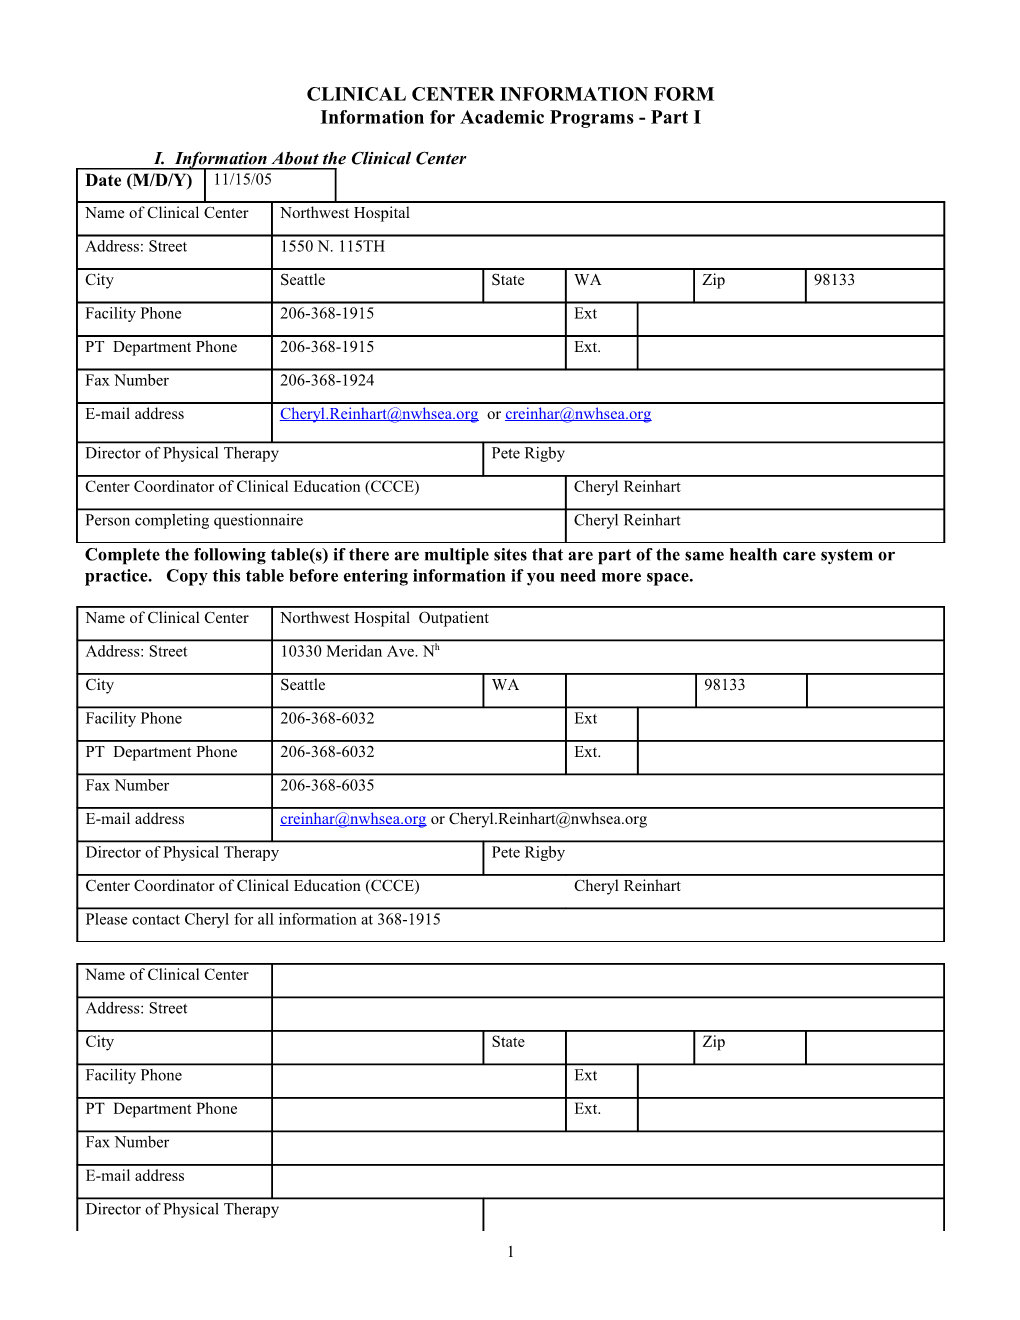 Clinical Center Information Form (Ccif) s1